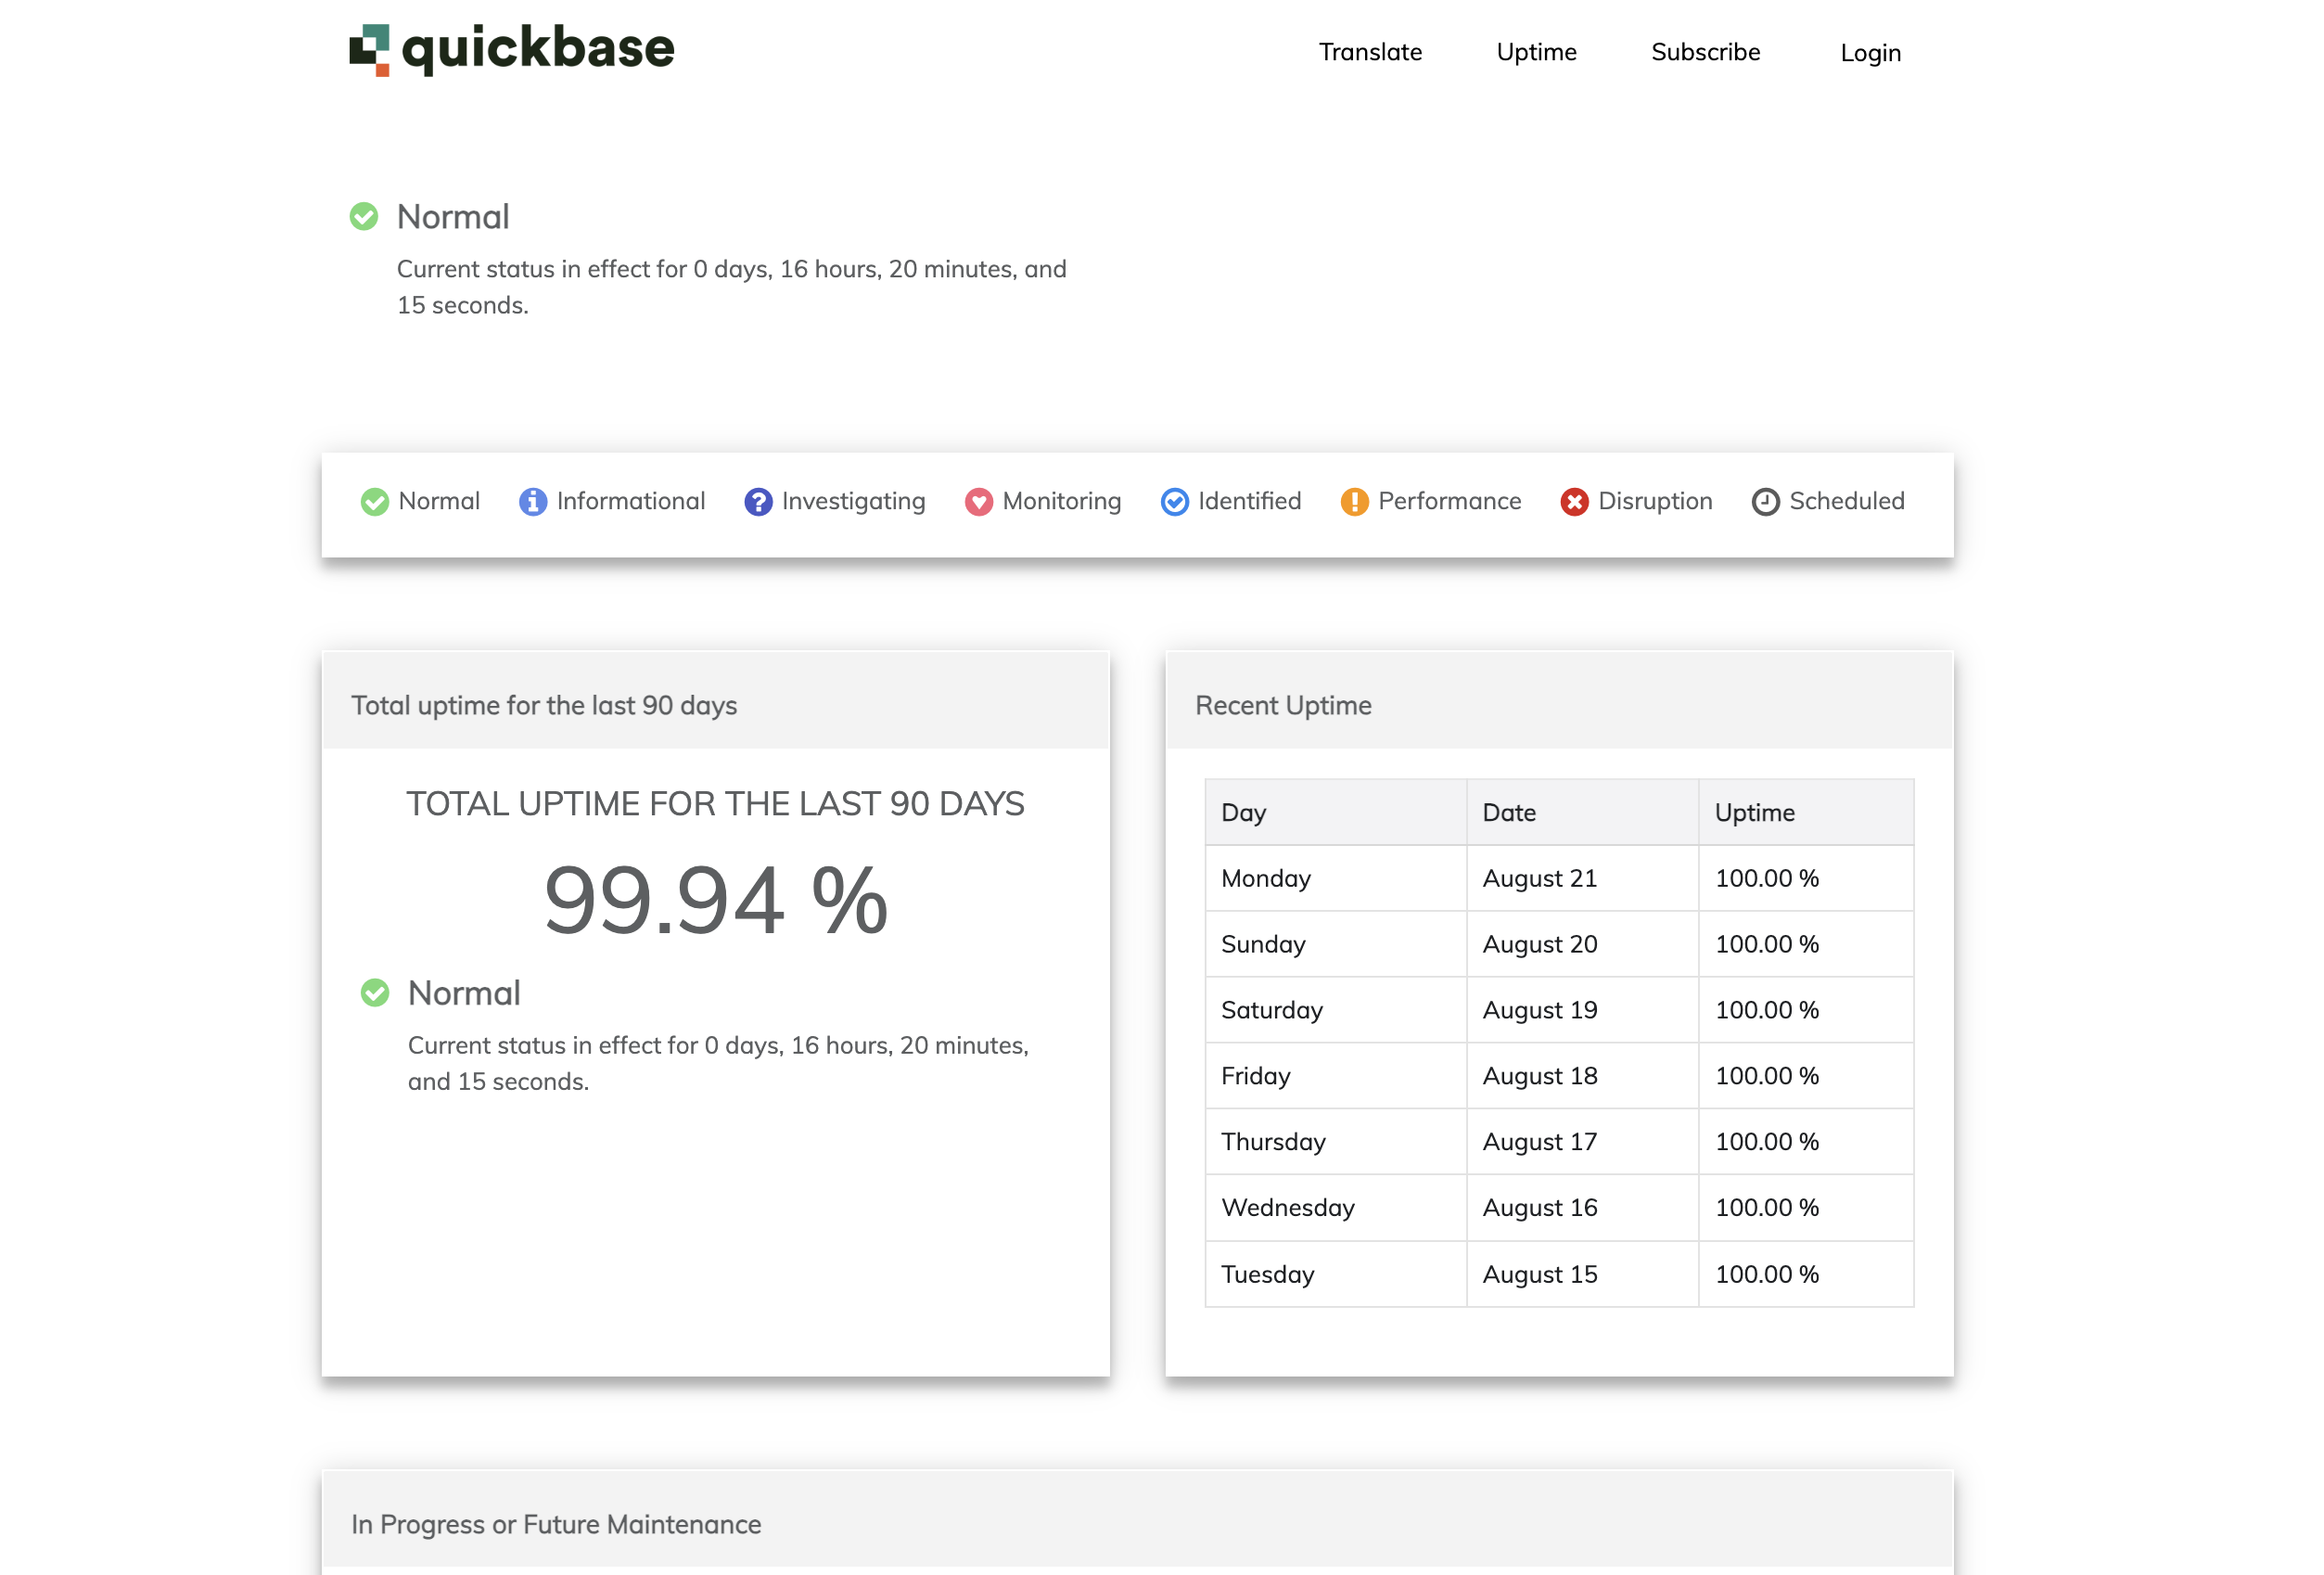 Quickbase status page example